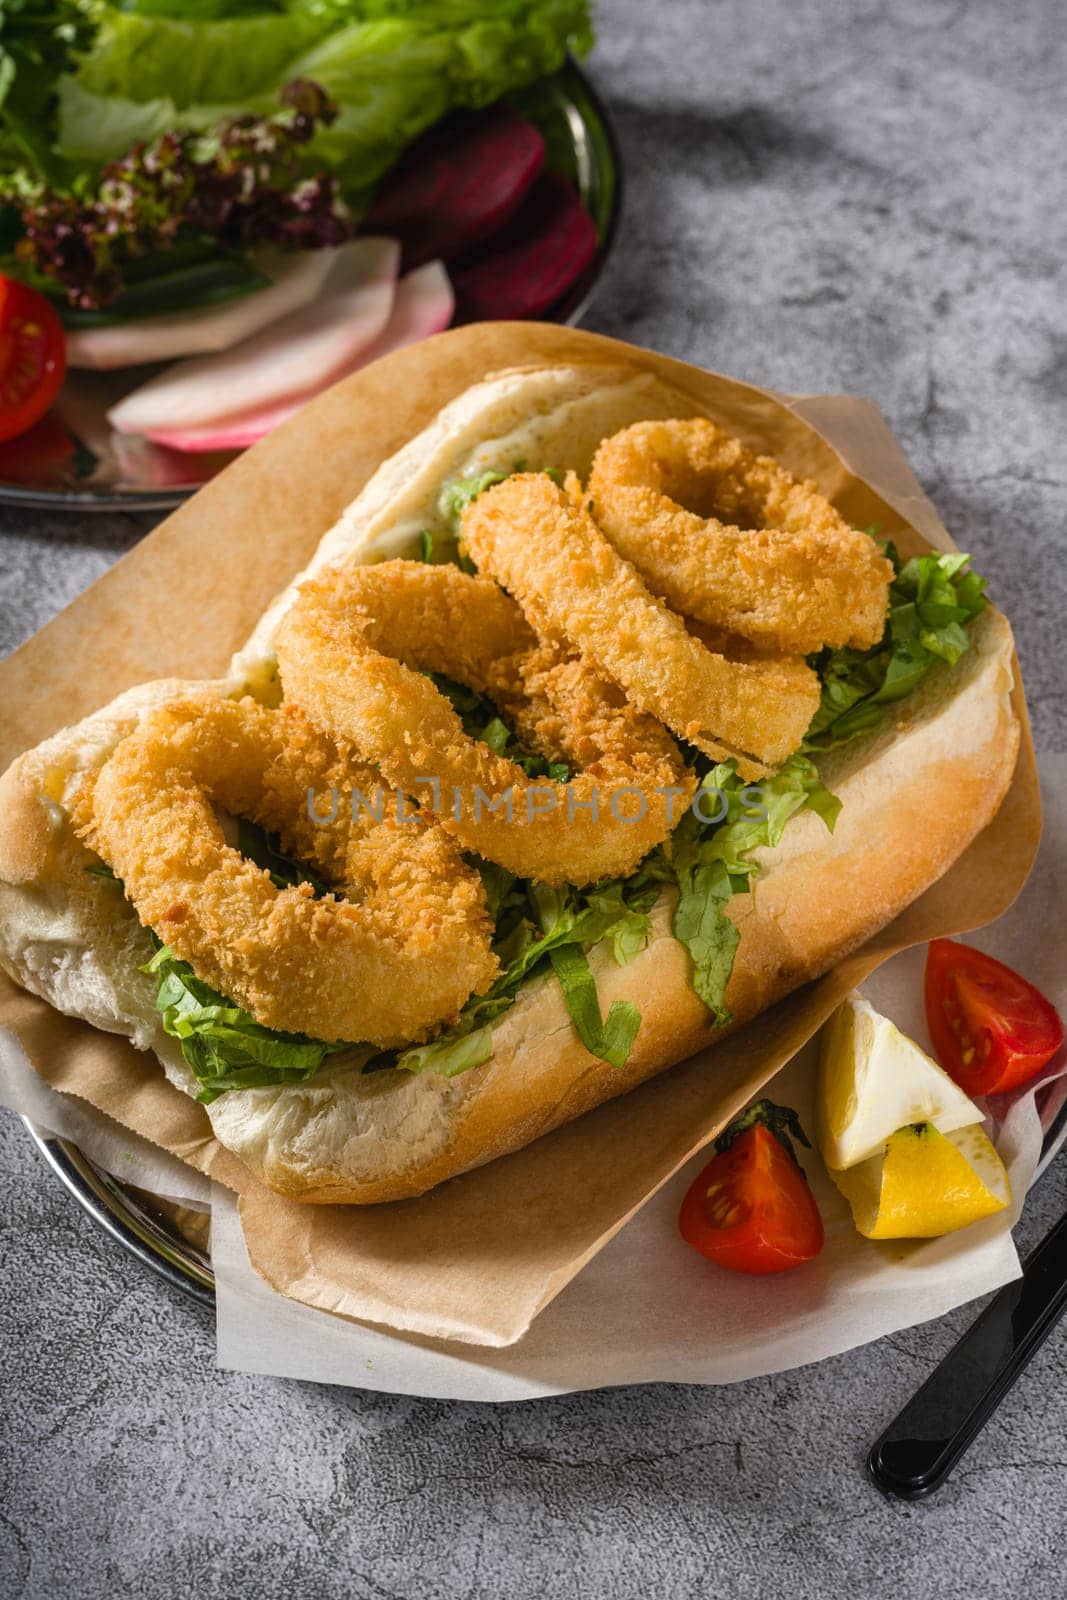 Deep fried squid in bread with greens on the side. Squid sandwich